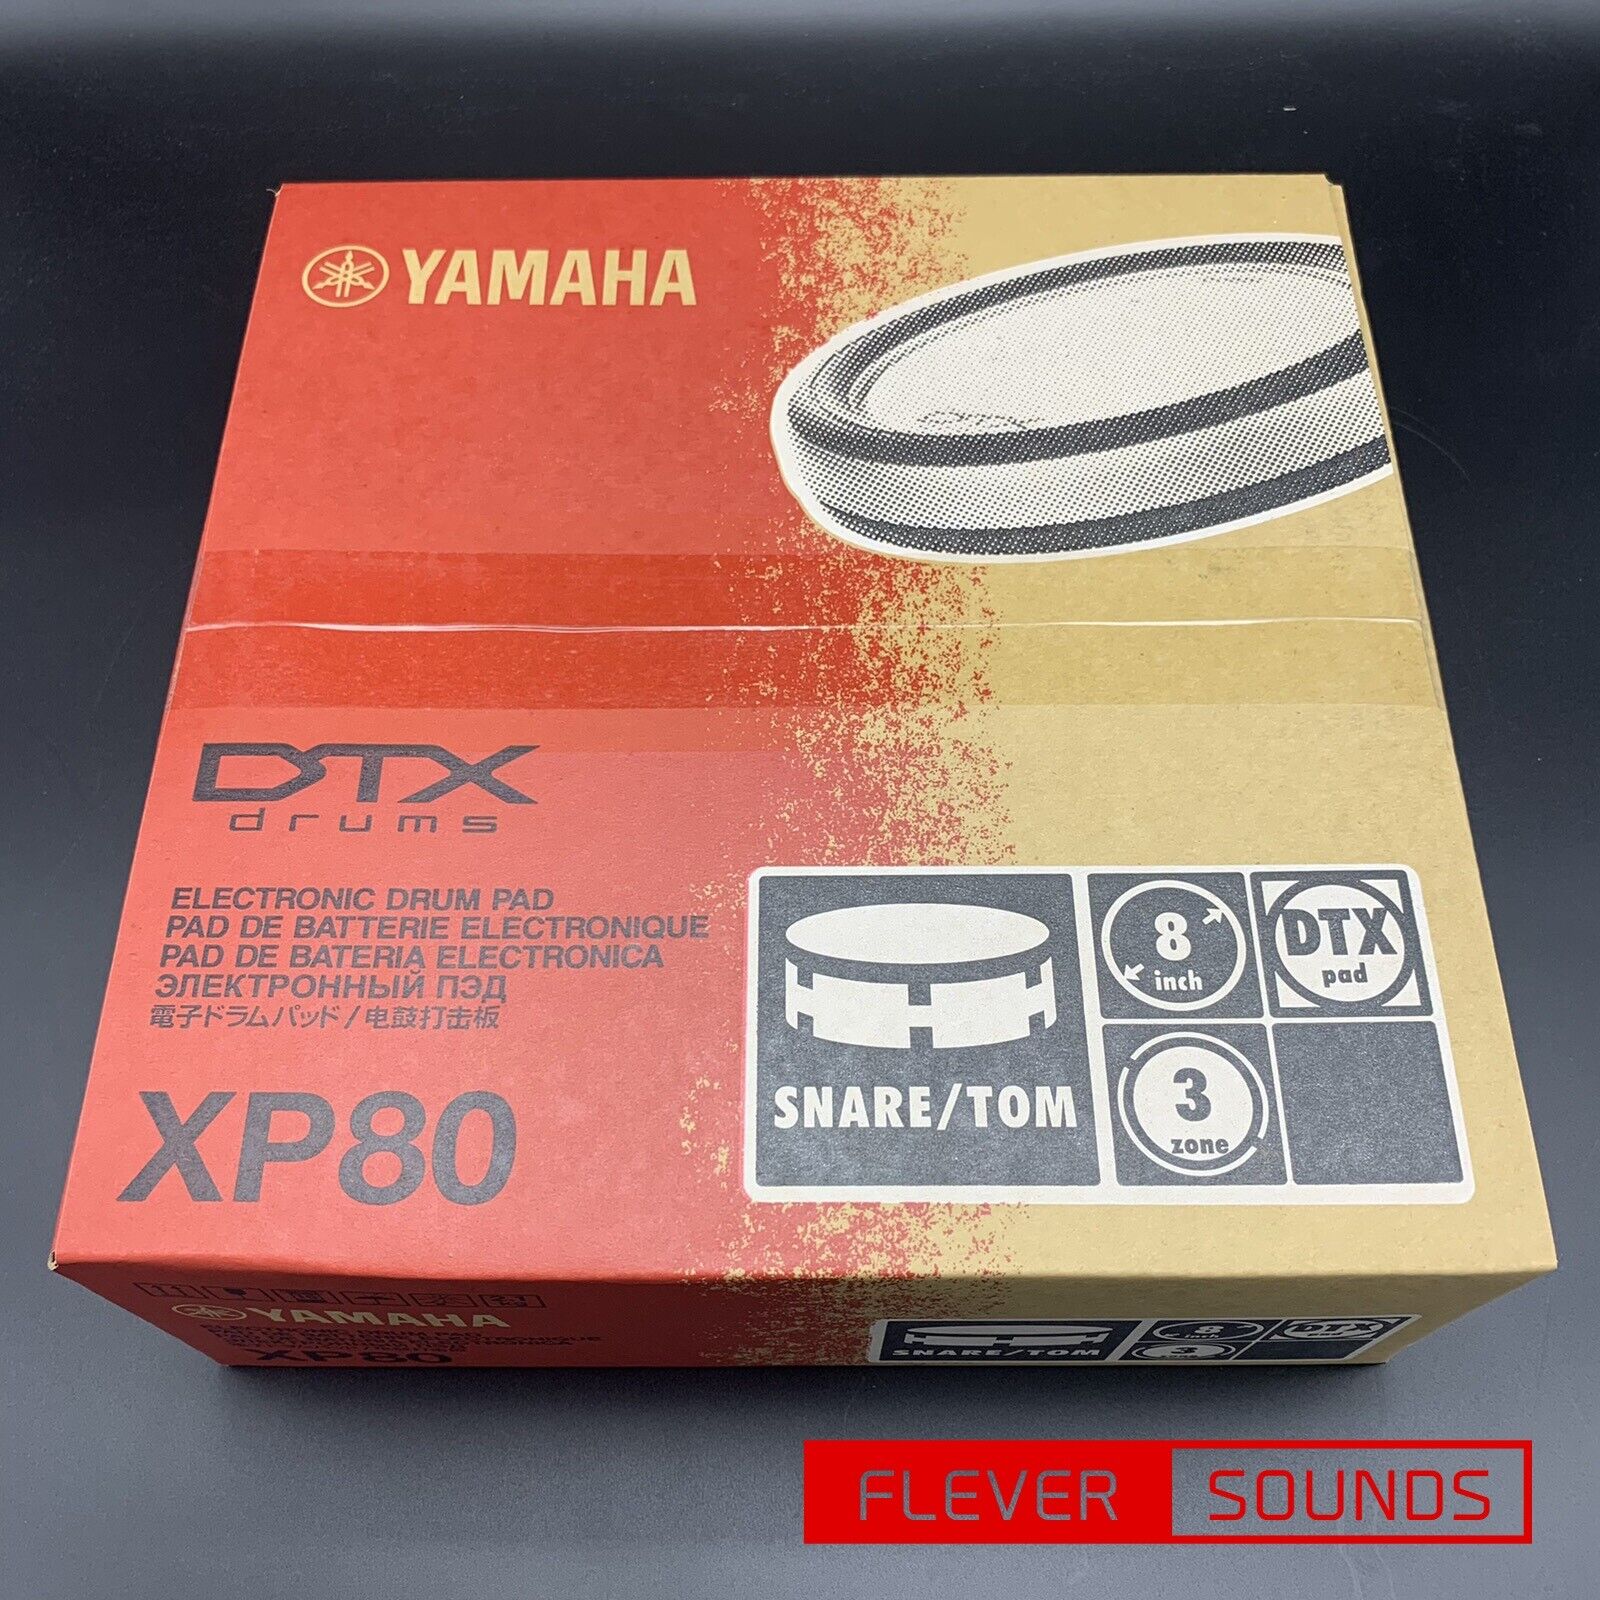 Yamaha XP80 Snare Tom DTX Pad 8 inch 3-Zone Electronic Drum Pad Textured TCS 1